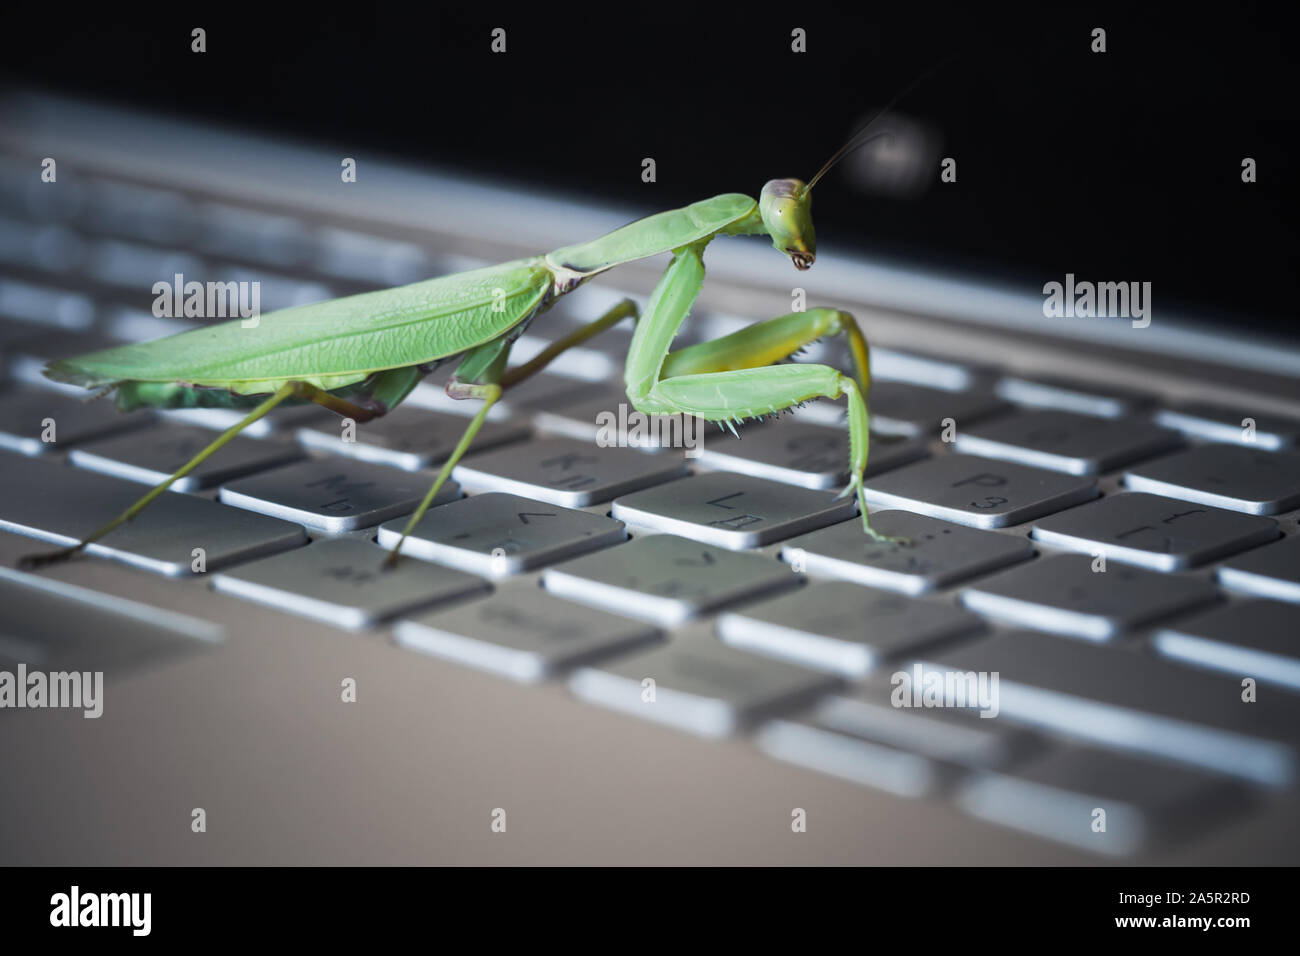 Computer bug metaphor. Mantis is on a laptop keyboard, close-up photo with selective focus Stock Photo